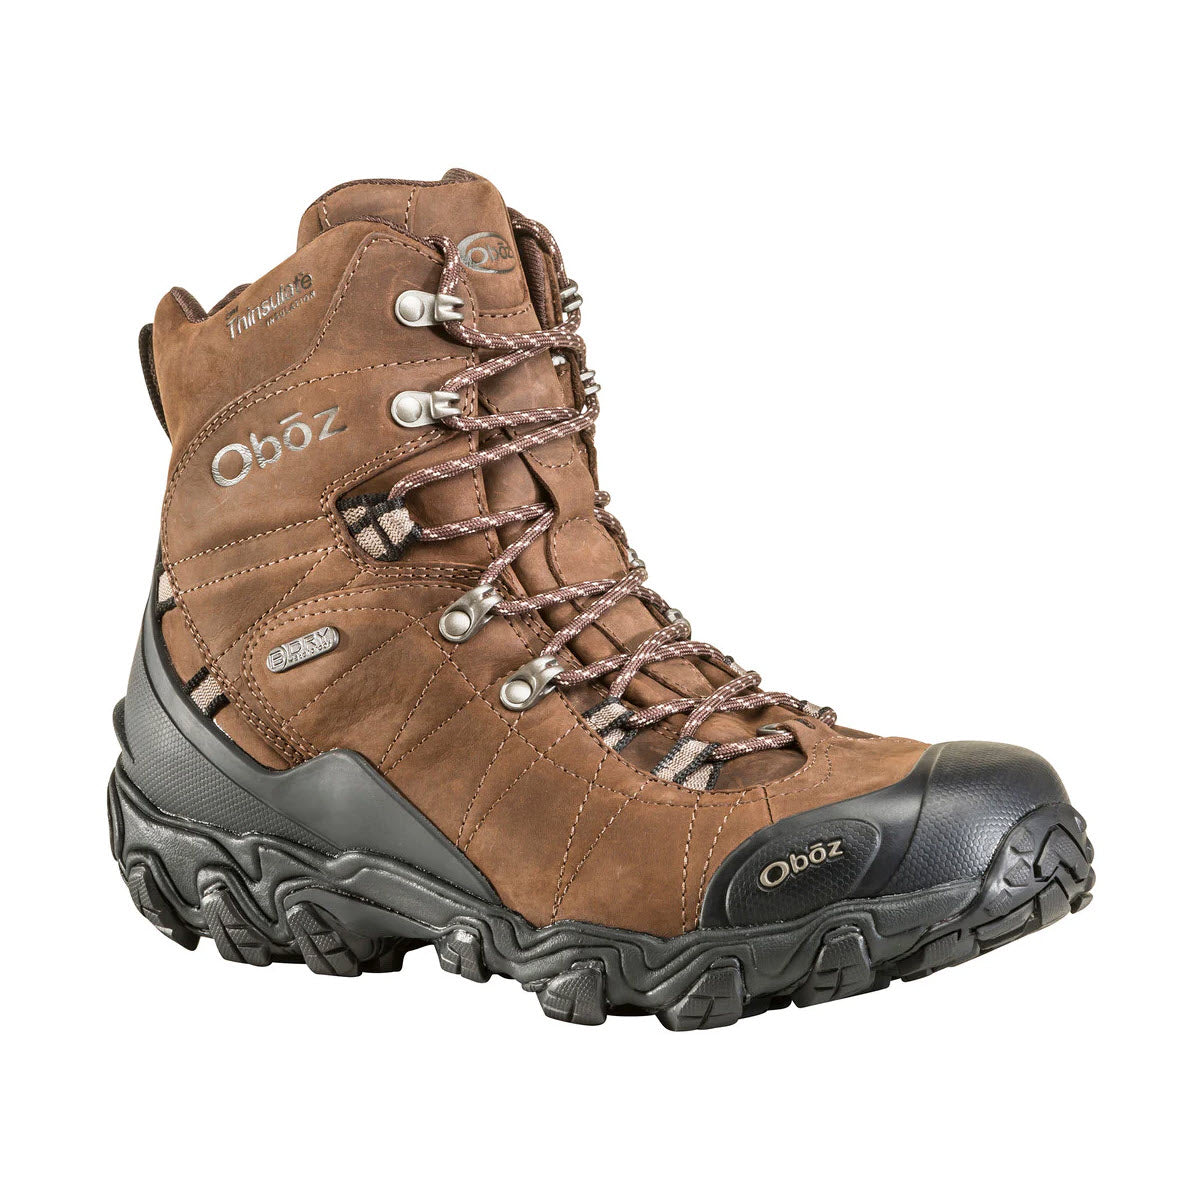 A single Oboz BRIDGER 8&quot; INSULATED B-DRY BARK hiking boot in brown with black accents and metal lacing hooks, viewed from the side against a white background.